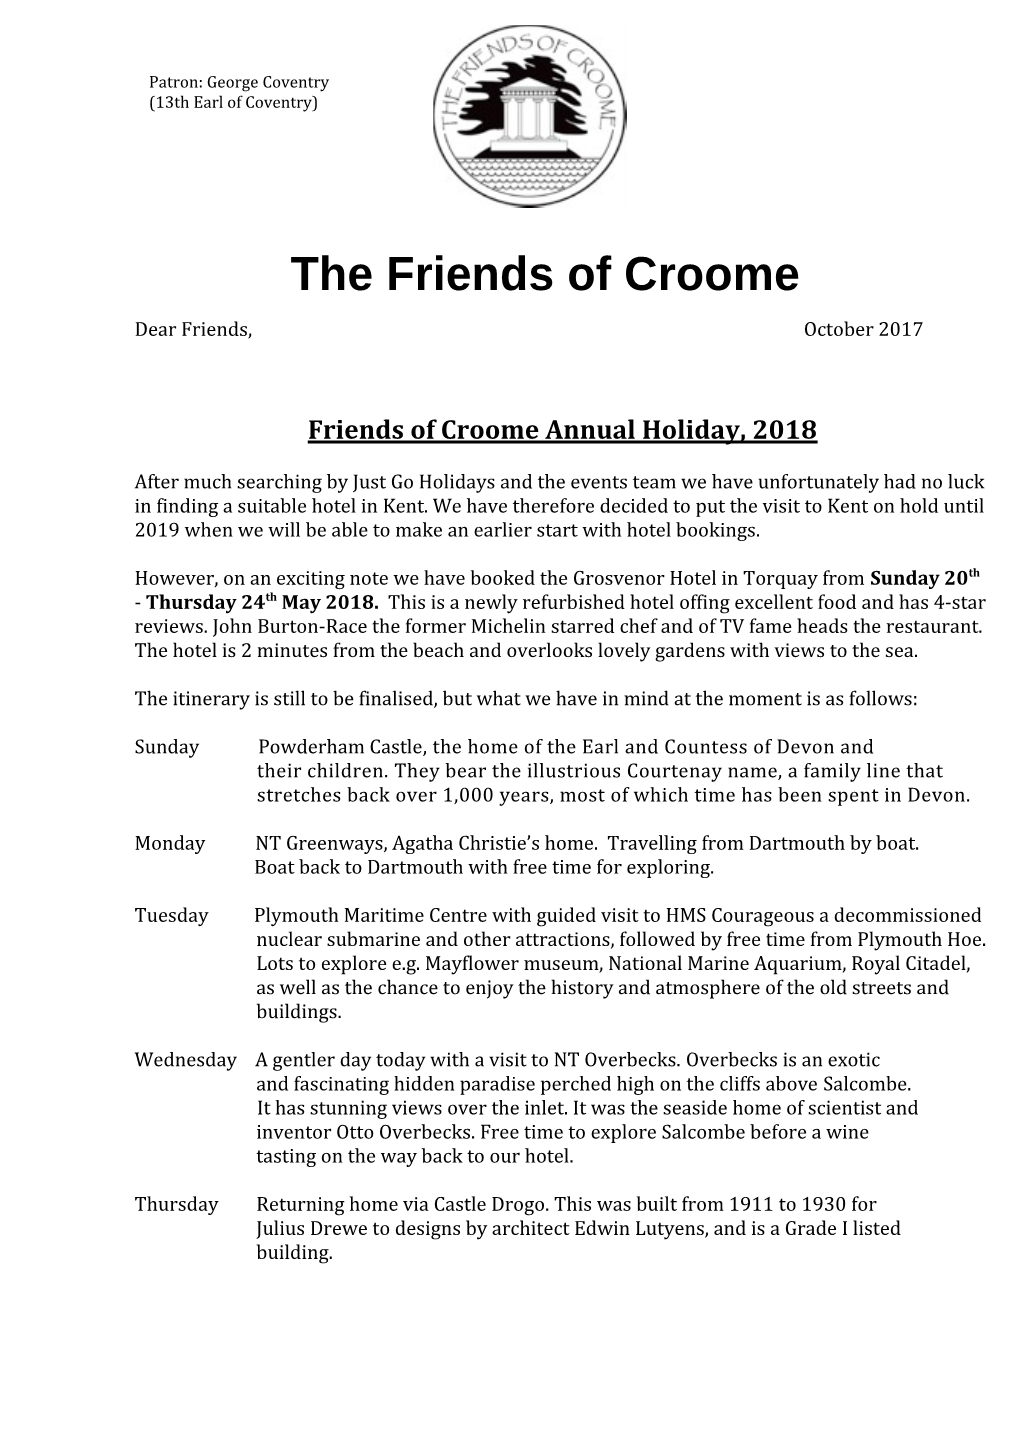 Friends of Croome Annual Holiday, 2018